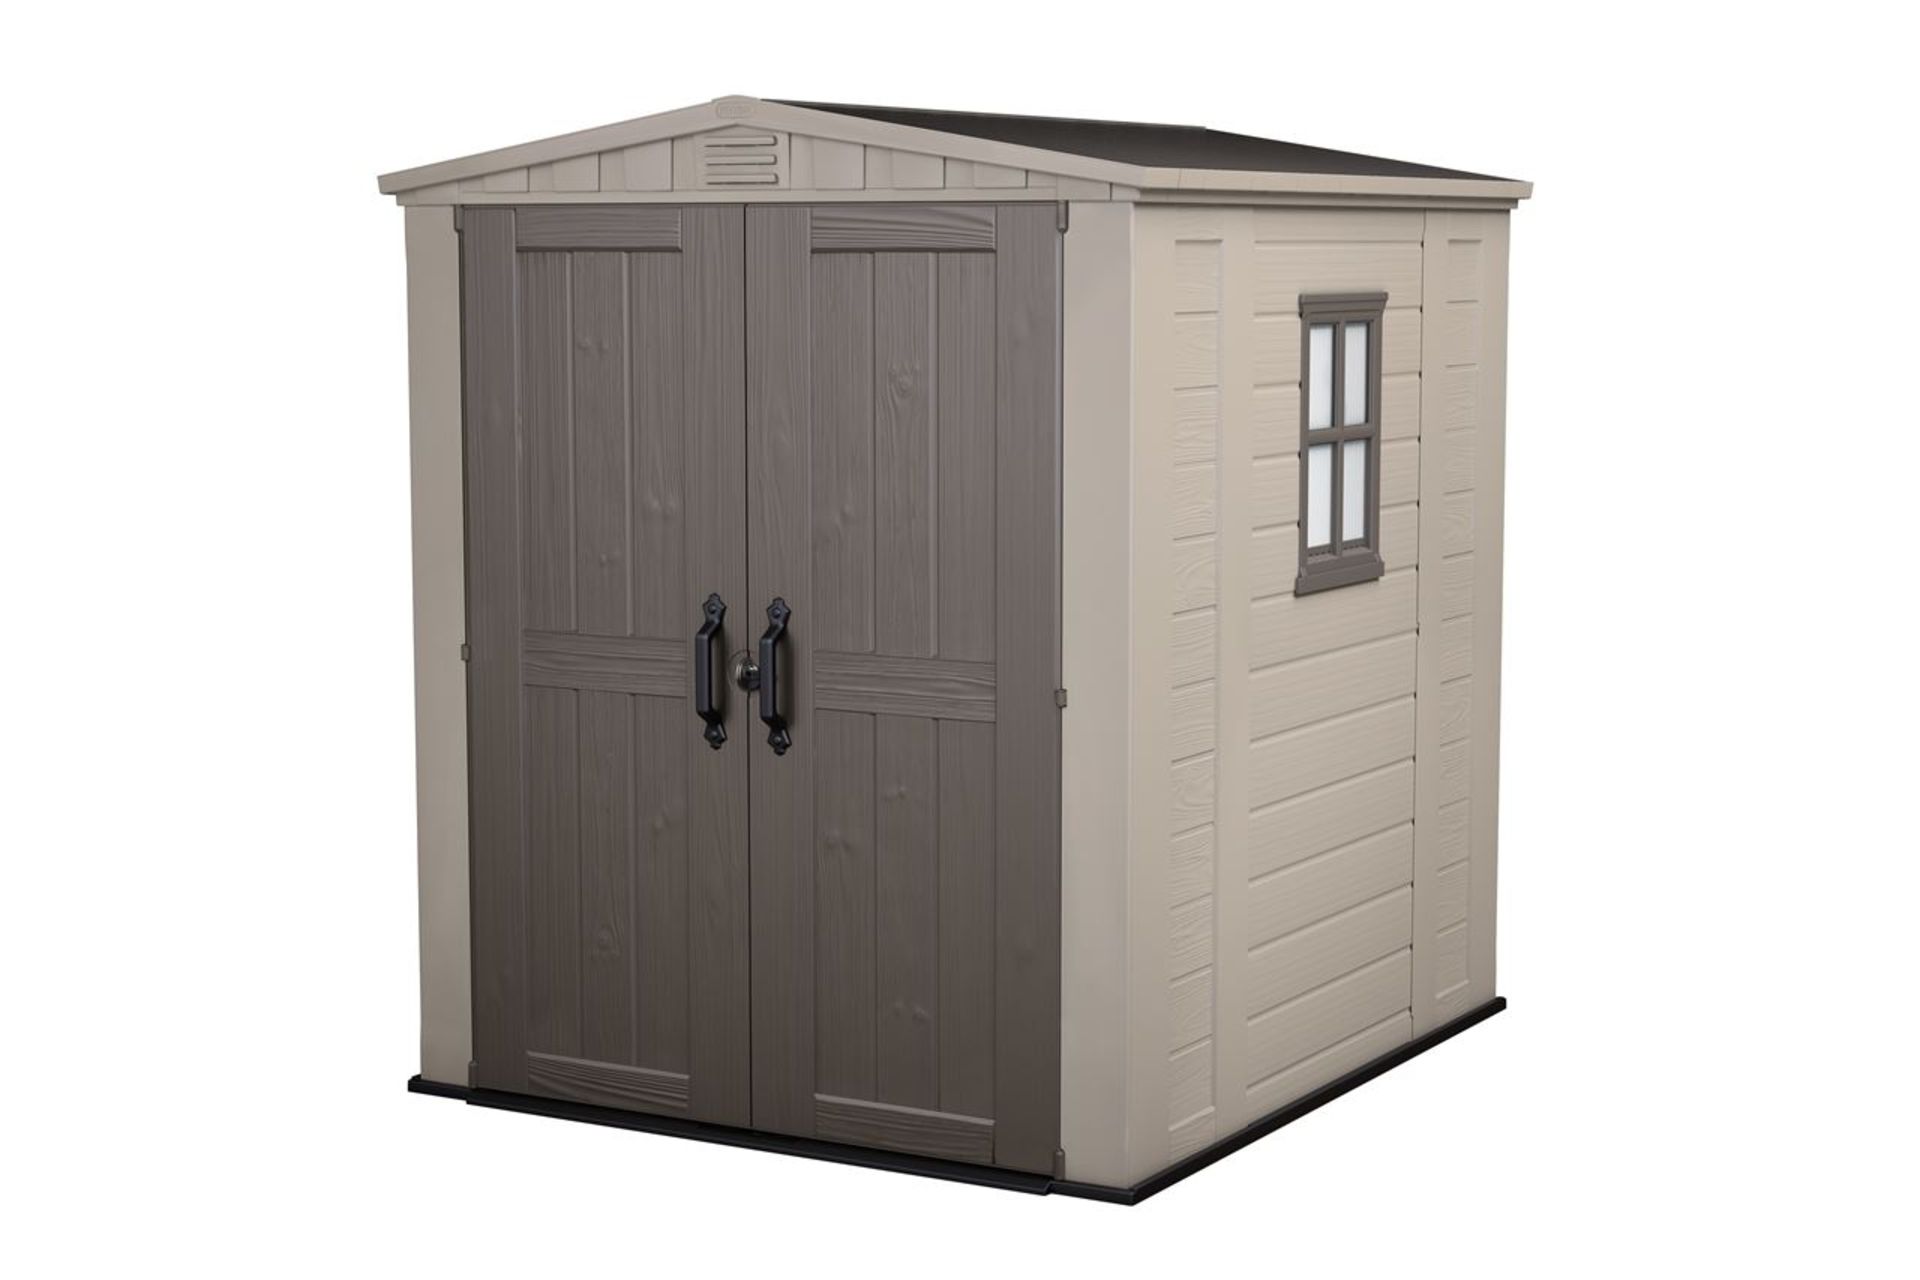 Keter Factor 6 x 6 Shed A combination of a great wood-like texture and durable, weather-resistant - Image 2 of 5